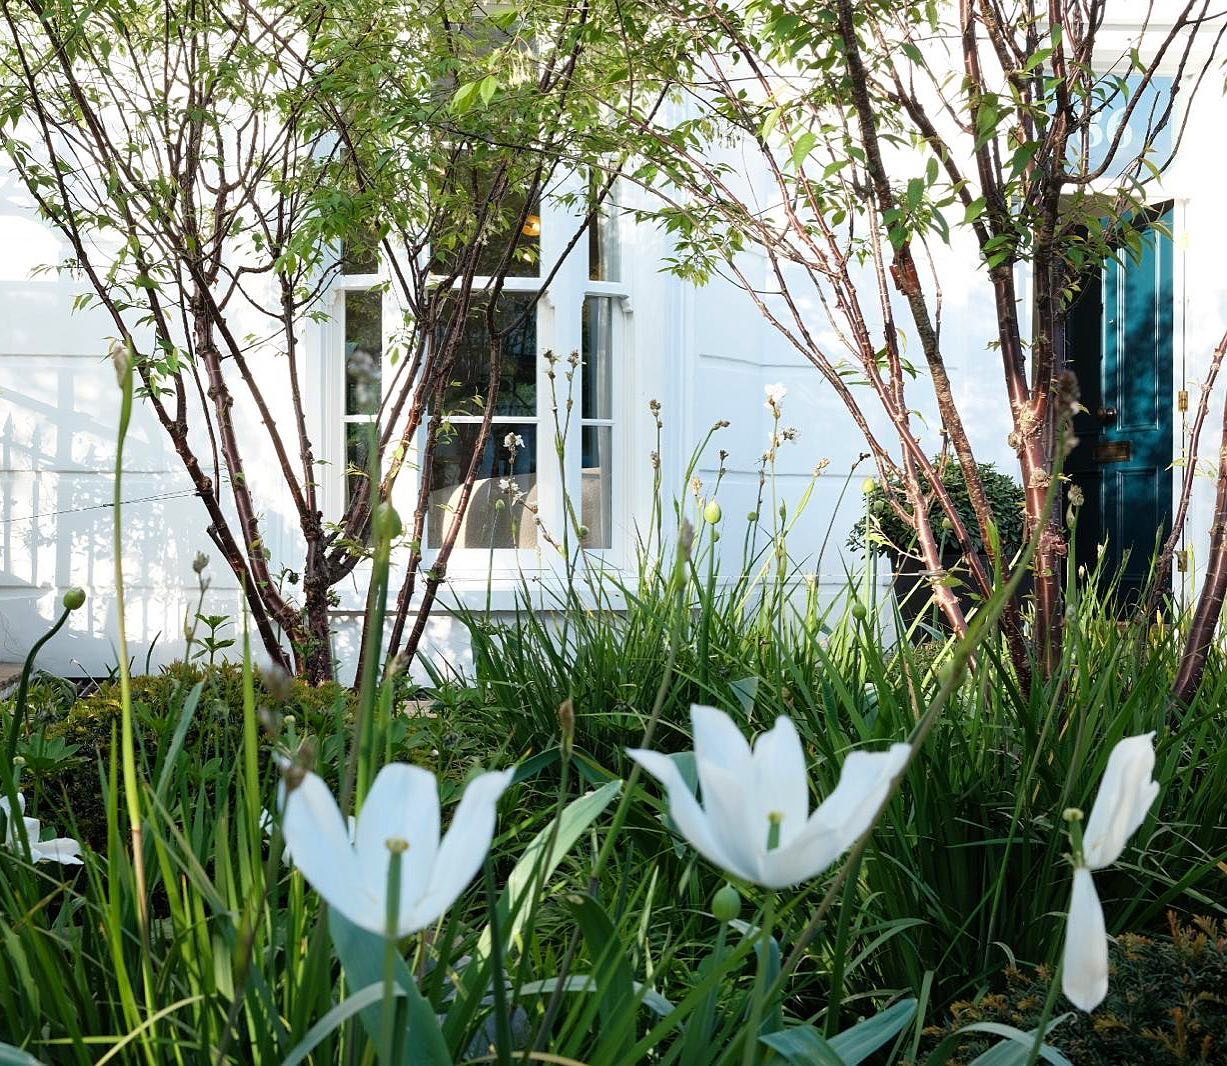 In praise of front gardens!

Many thanks to my lovely clients for this photo update on their front garden, as seen from the street, designed and planted last year. The cold spring has meant a long season for the tulips, Libertia is just coming into f